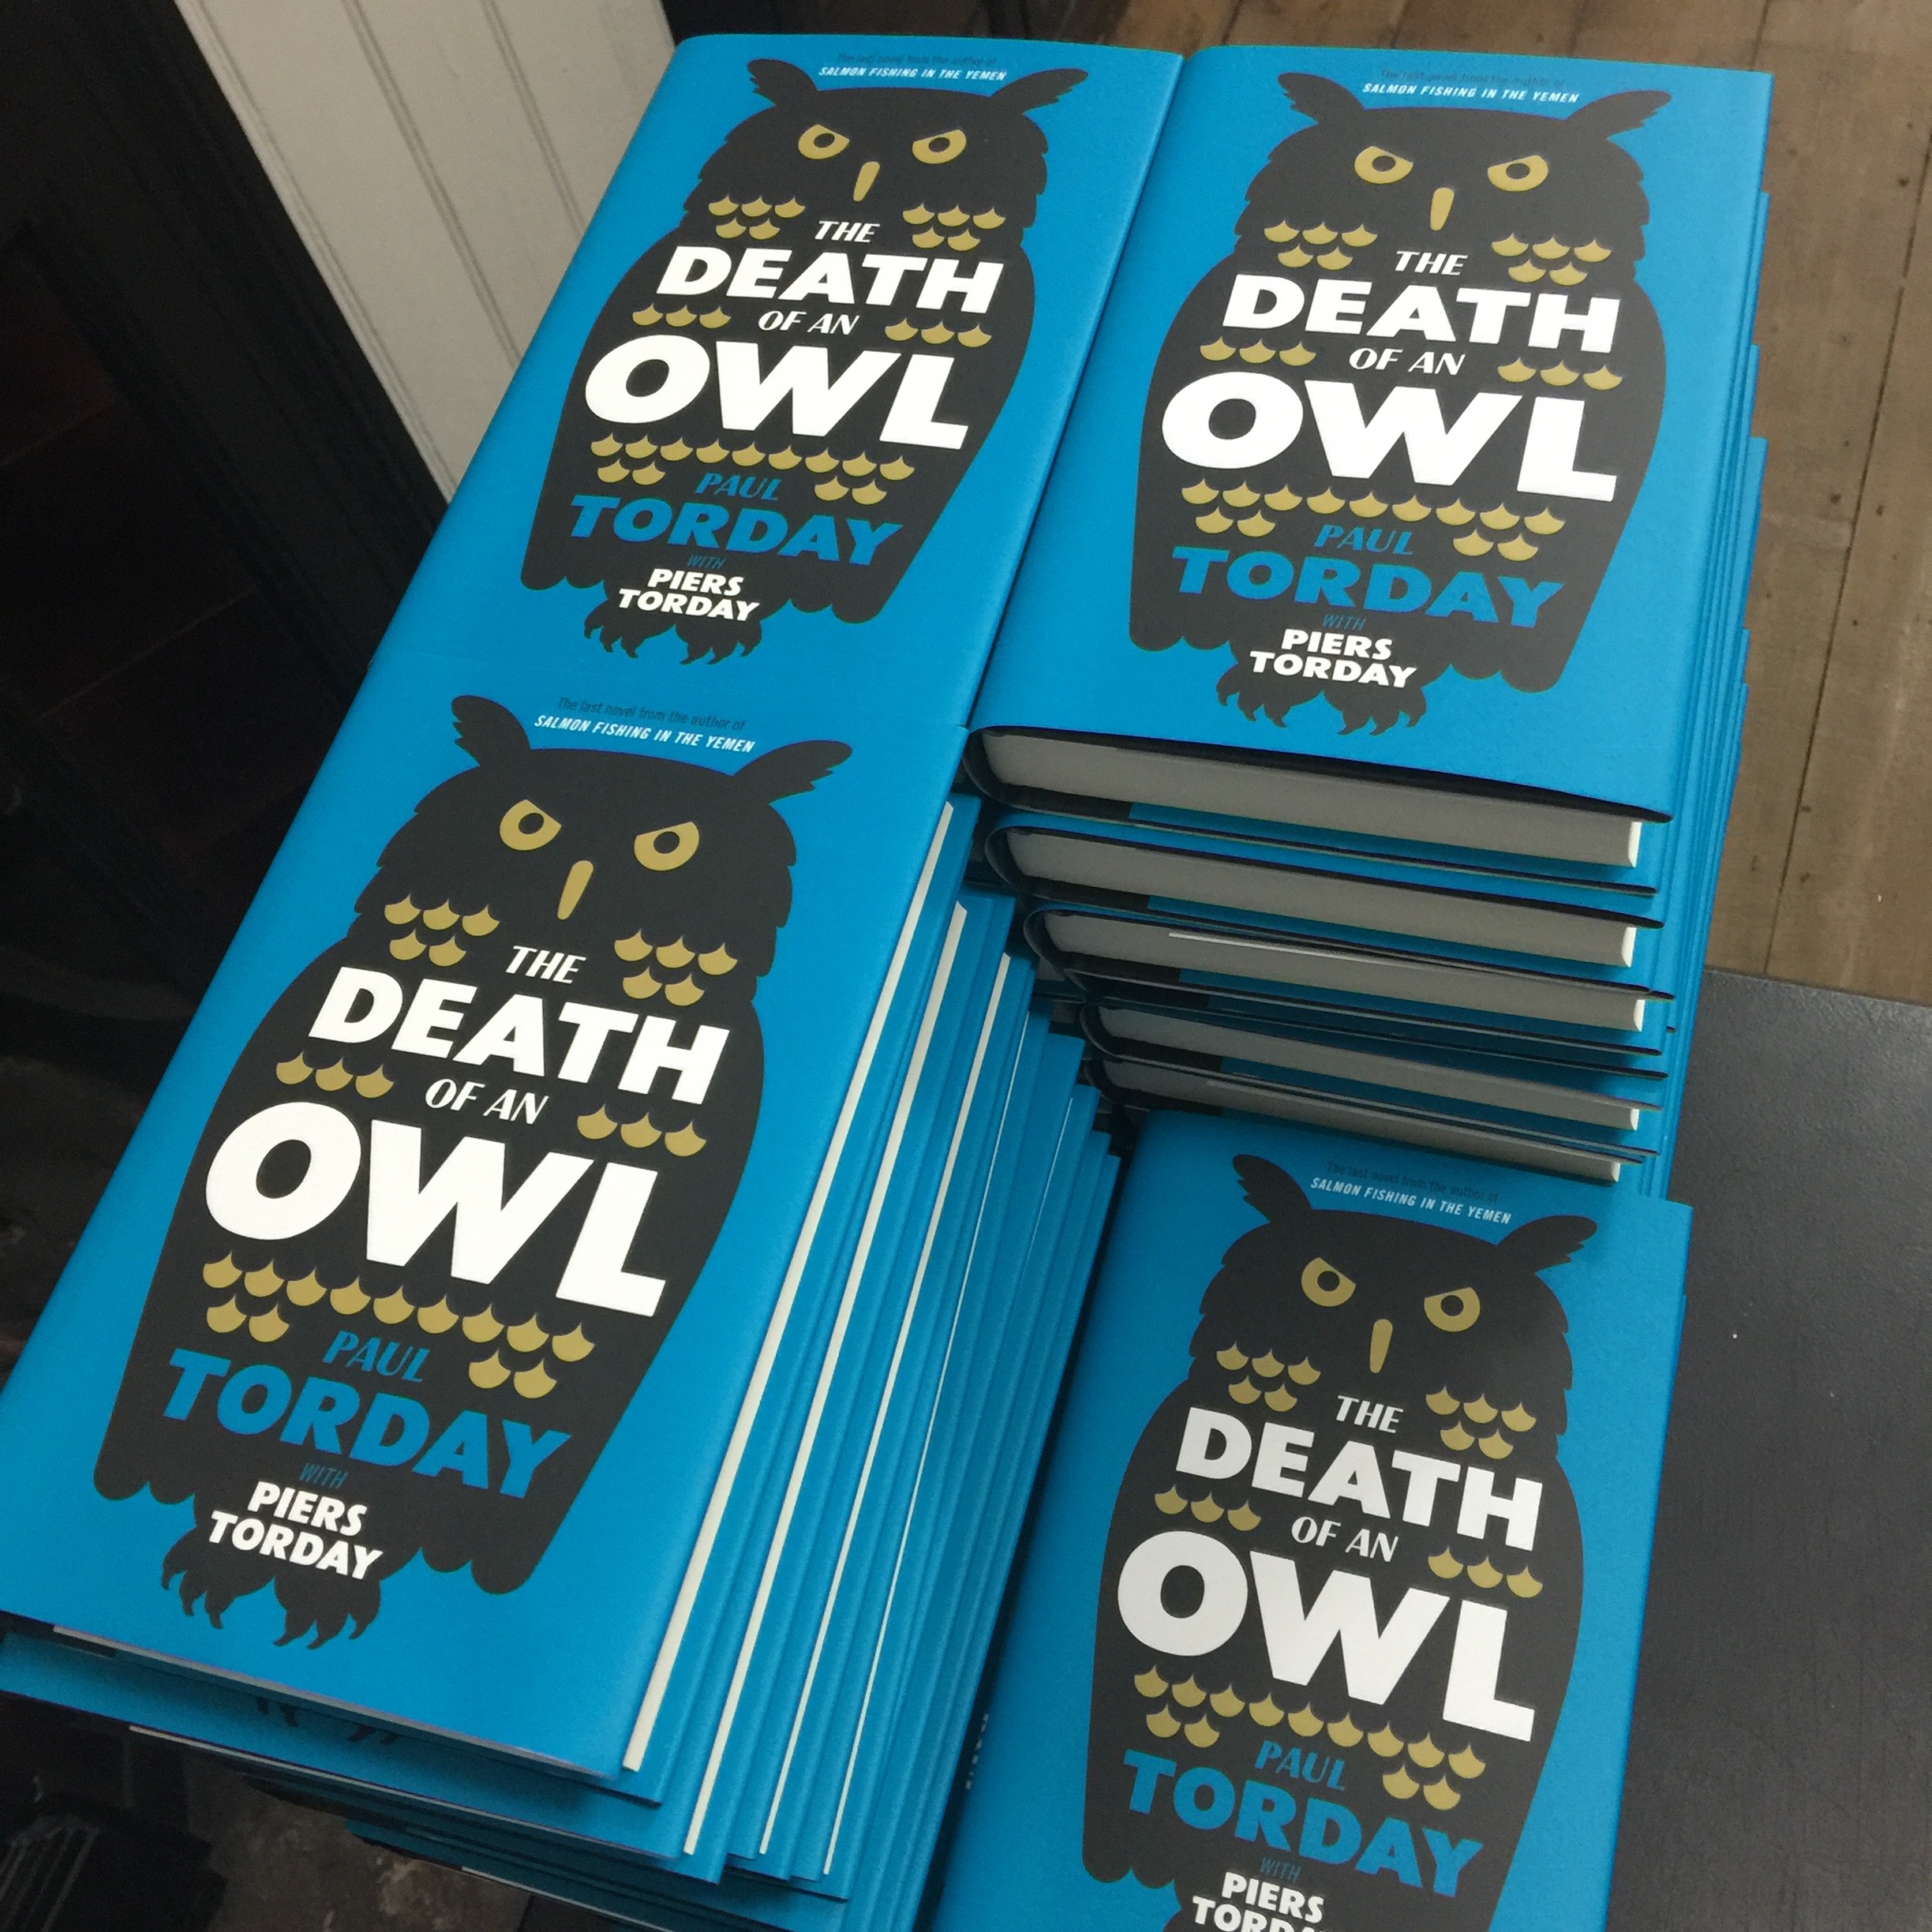 The Death of an Owl by Paul and Piers Torday hardback